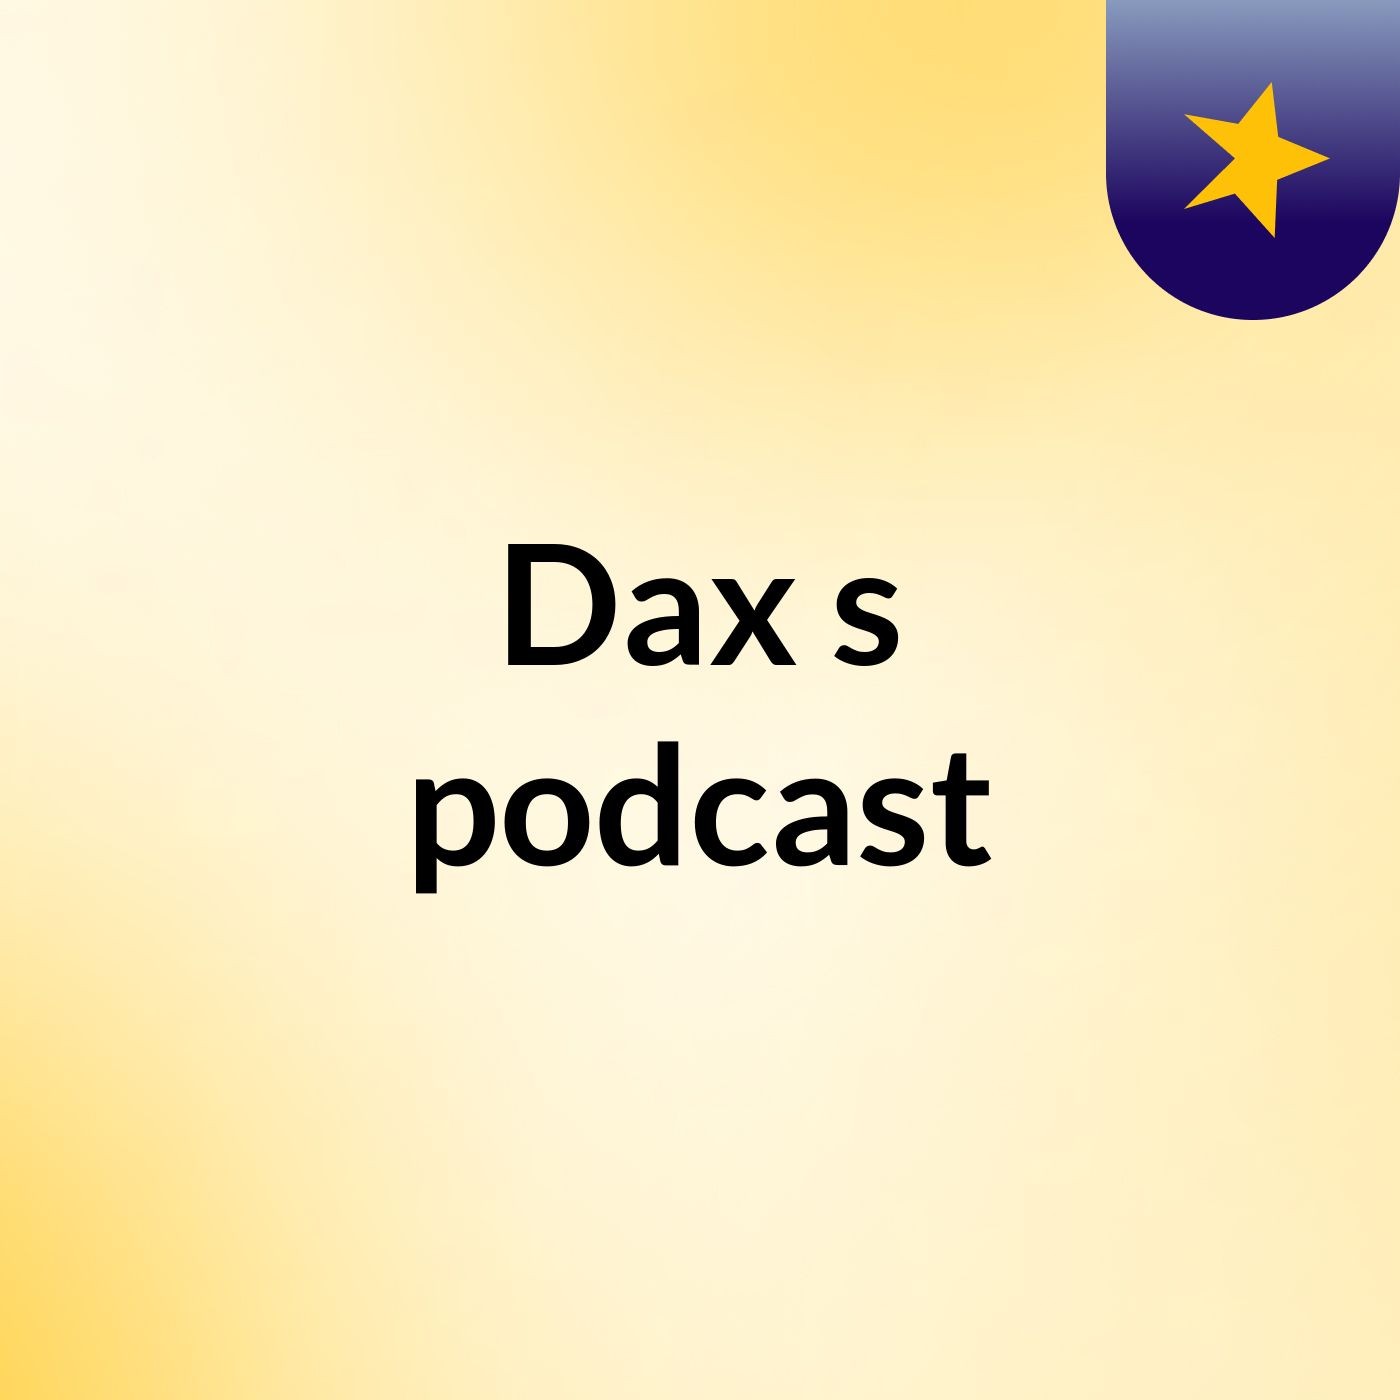 Episode 2 - Dax's podcast